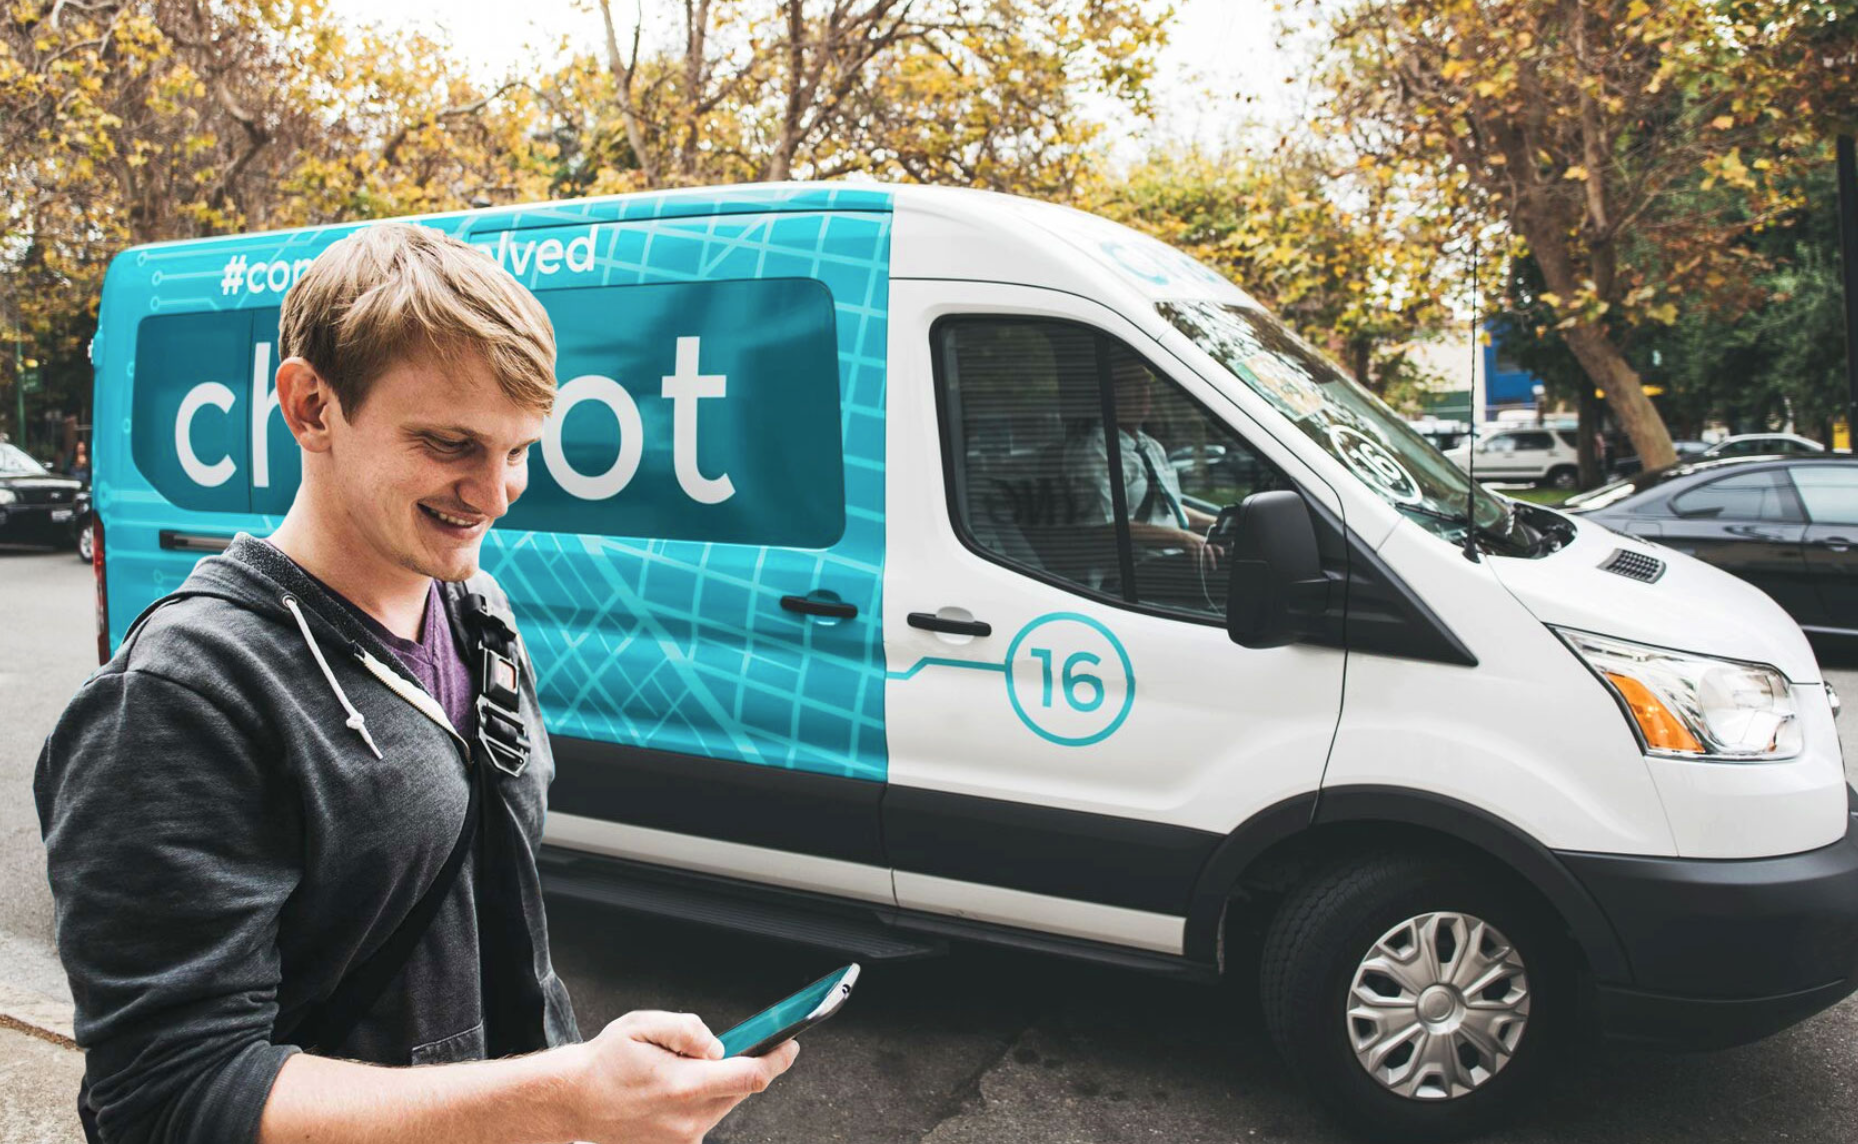 Chariot resumes shuttle service in SF today